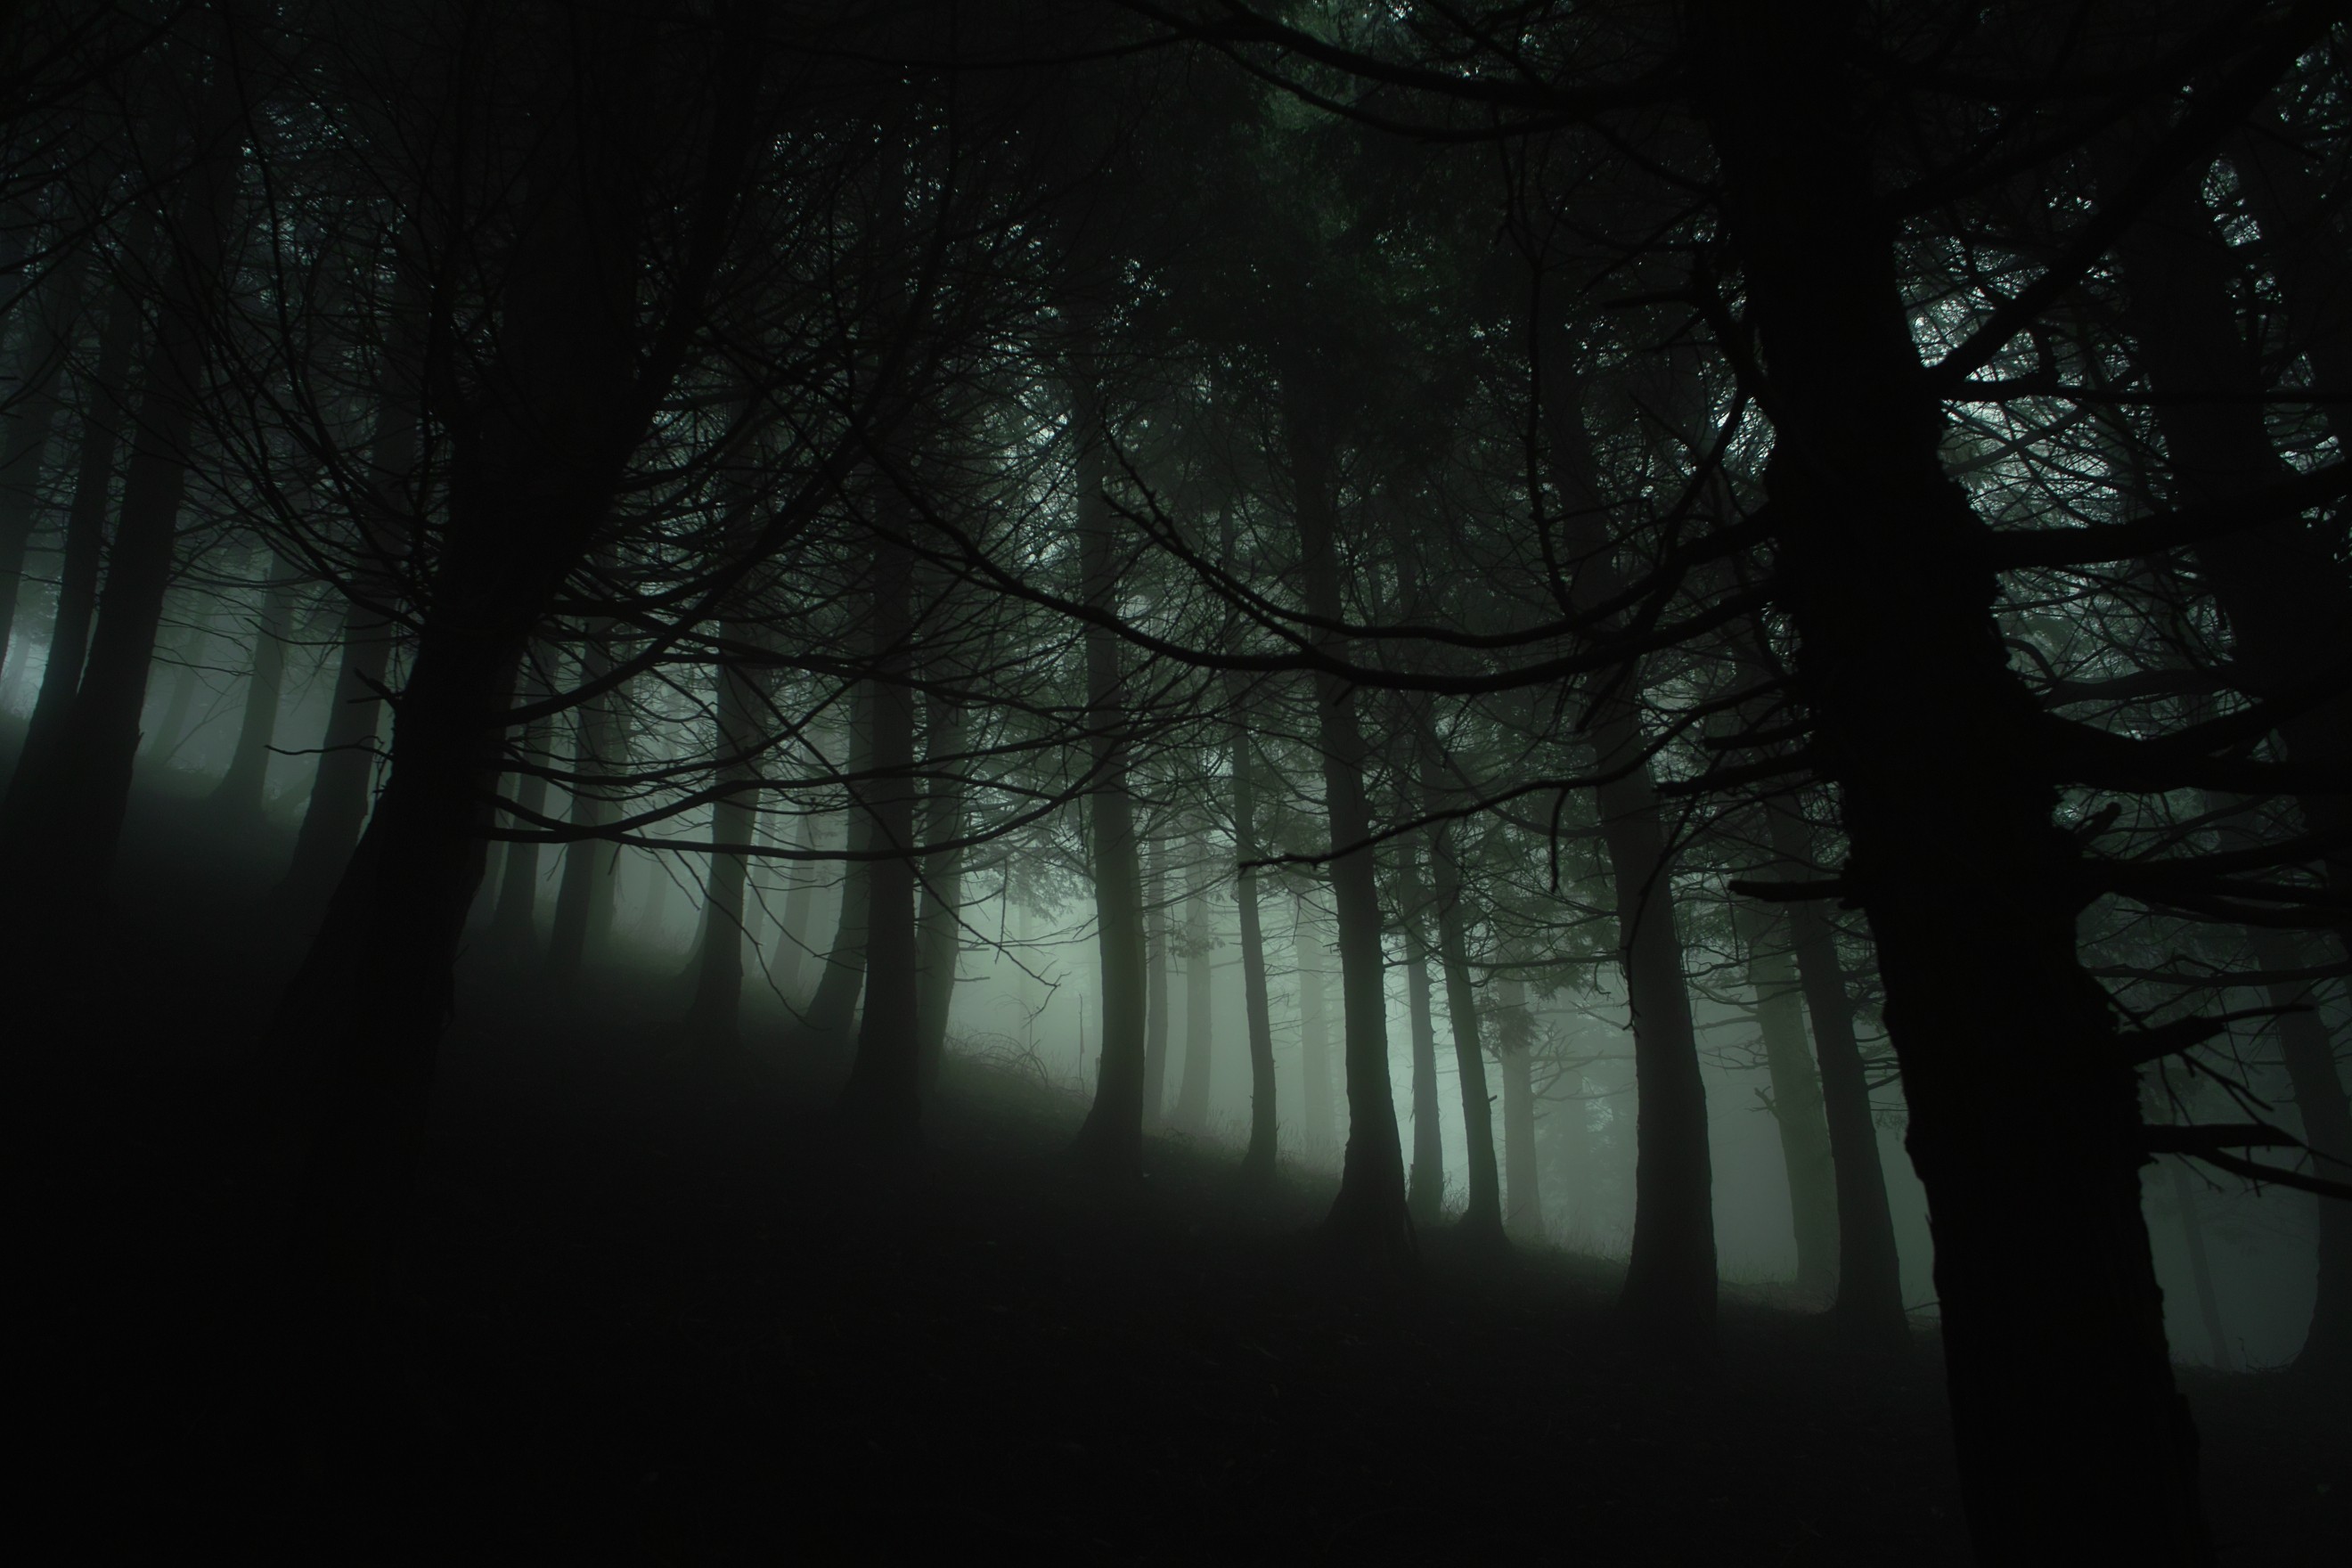 General 2640x1760 nature trees forest branch wood mist leaves silhouette hills dark spooky